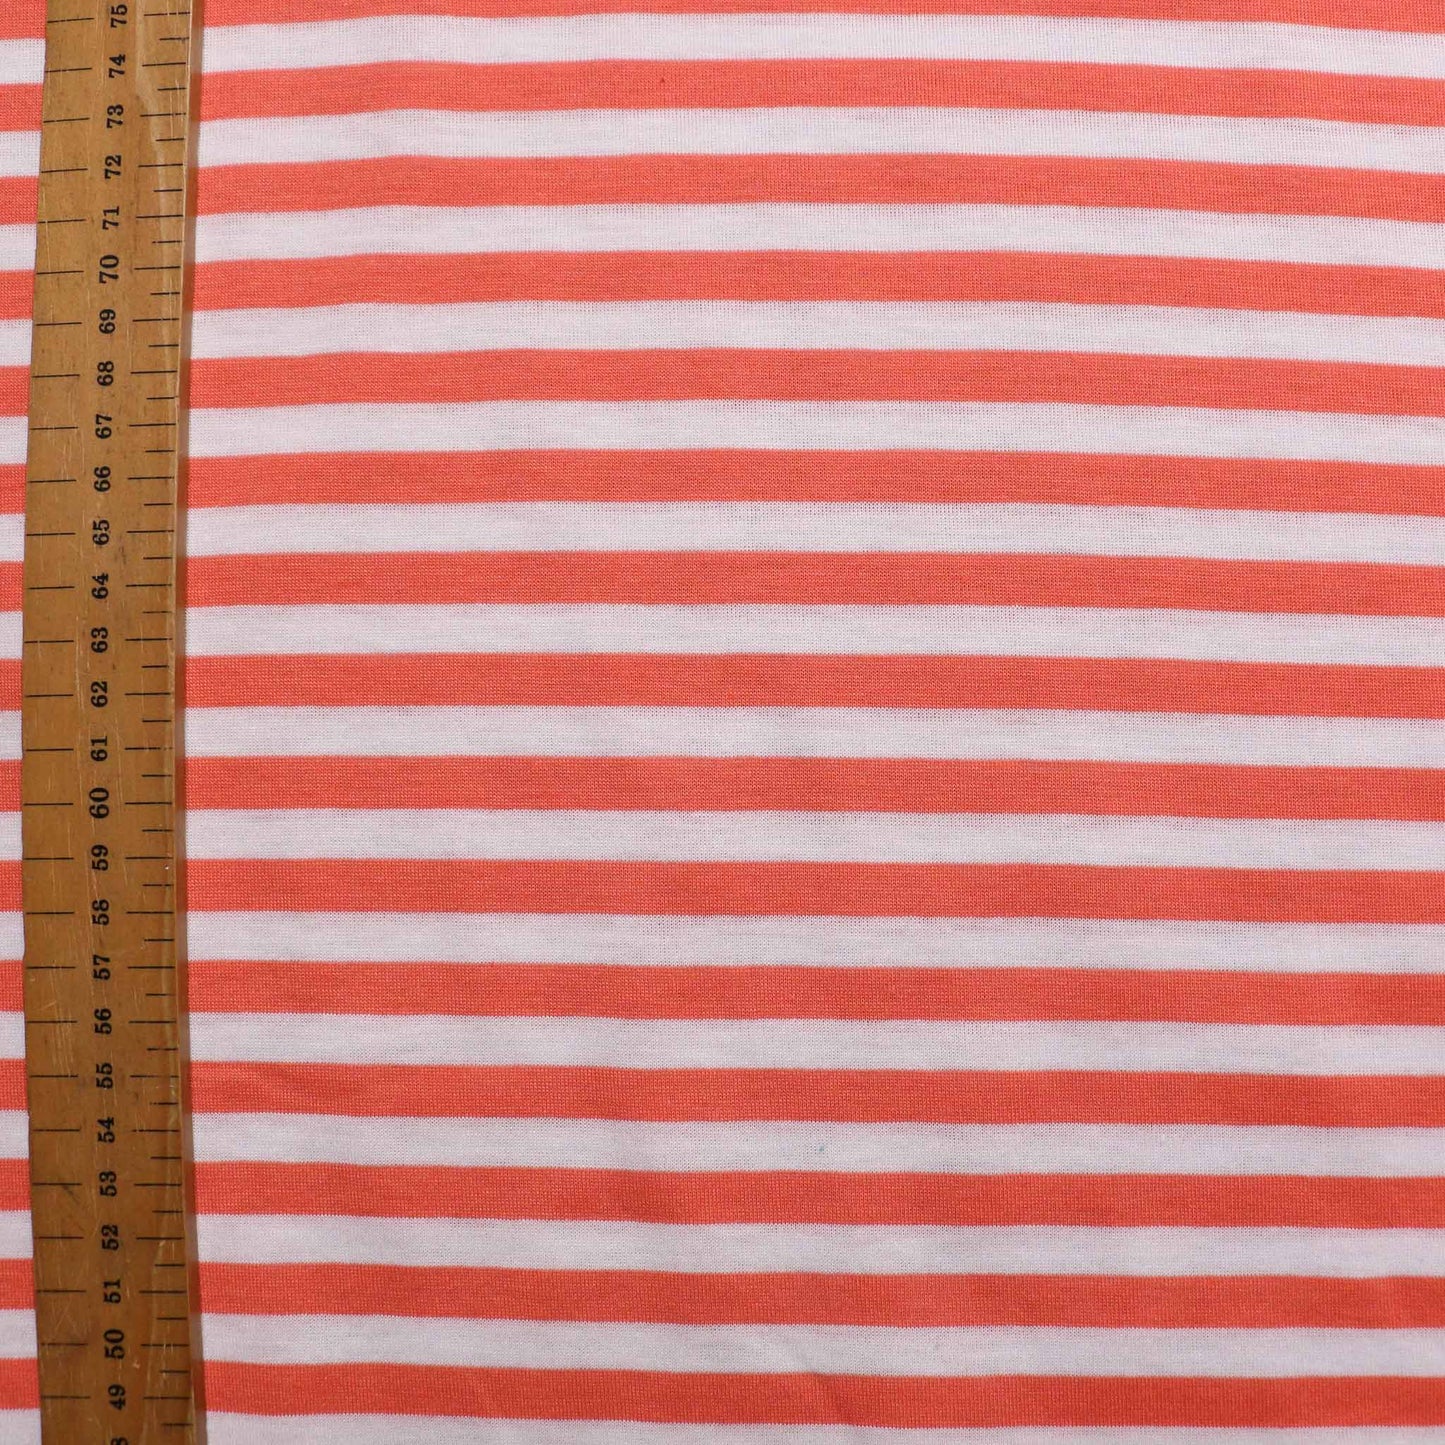 metre dressmaking fabric jersey with coral orange stripes